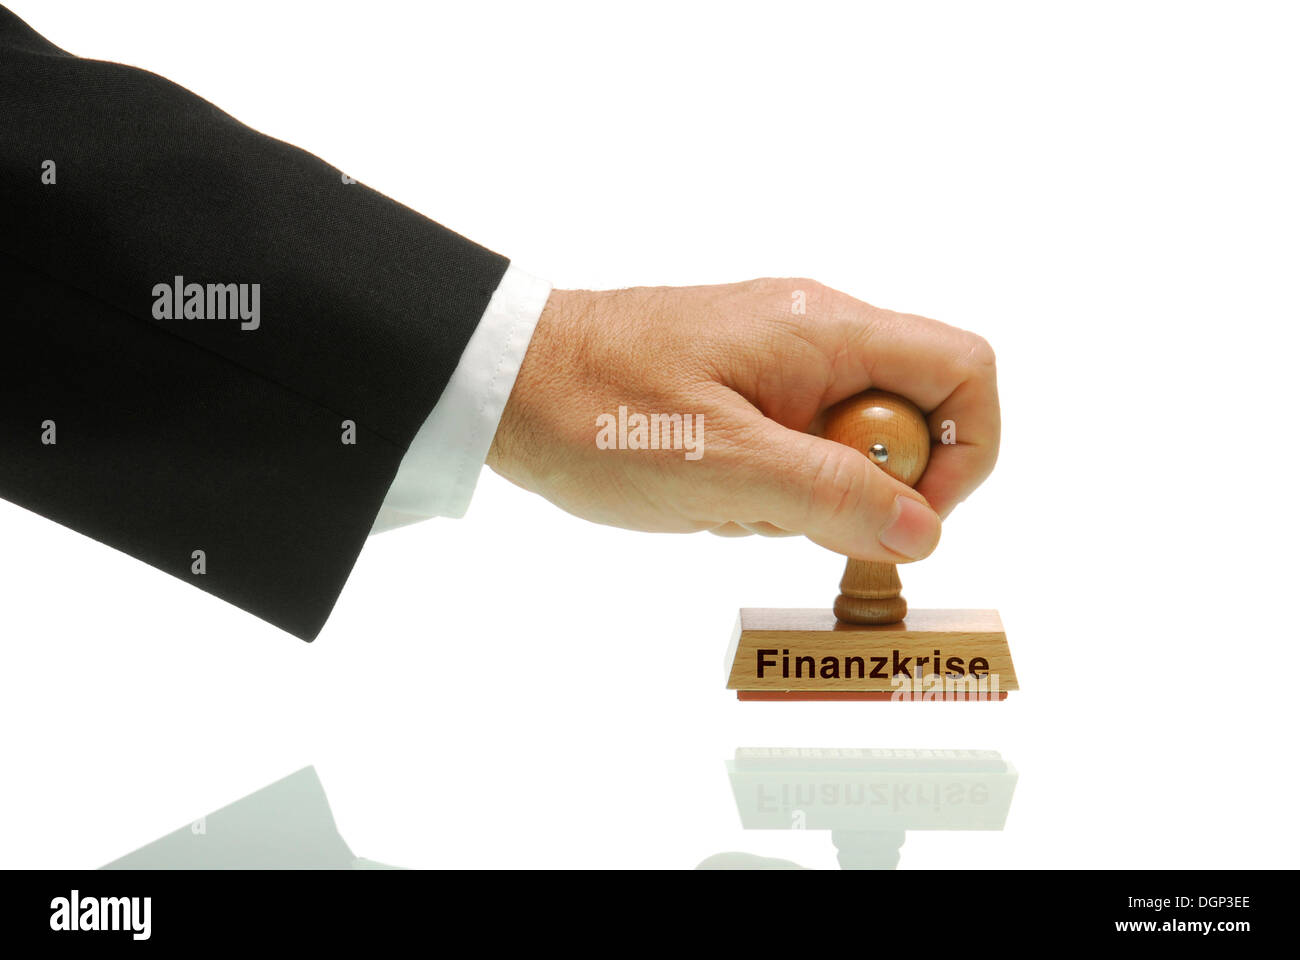 Manager hand holding a stamp labelled Finanzkrise, German for financial crisis Stock Photo